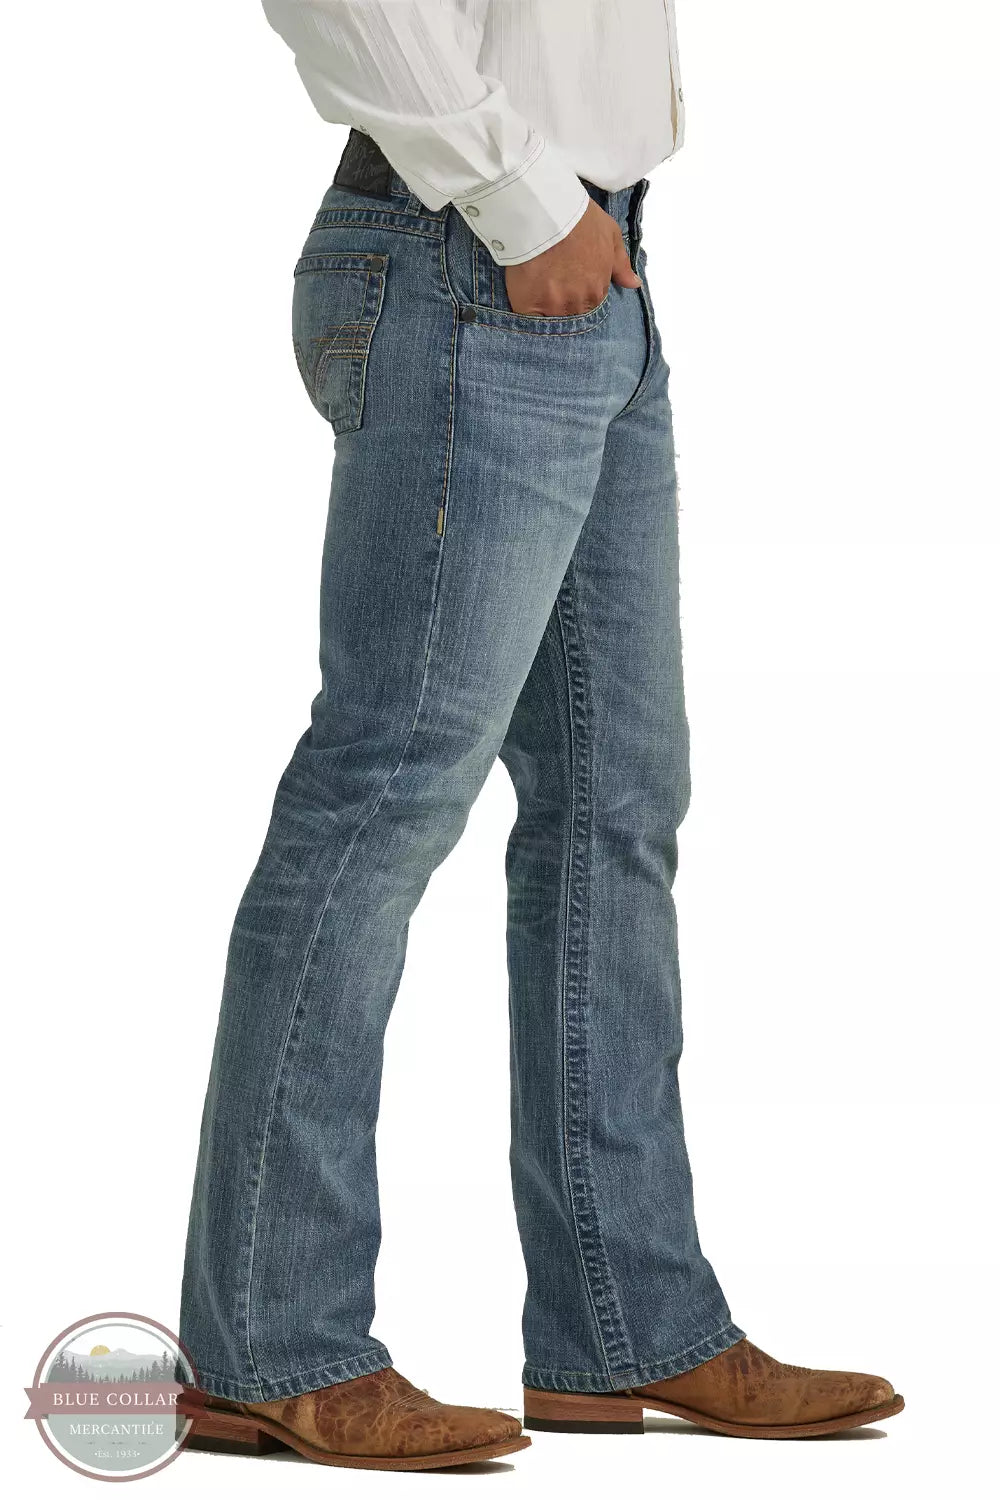 Wrangler 112338550 Rock 47 Slim Fit Bootcut Jeans in Roundabout Side View